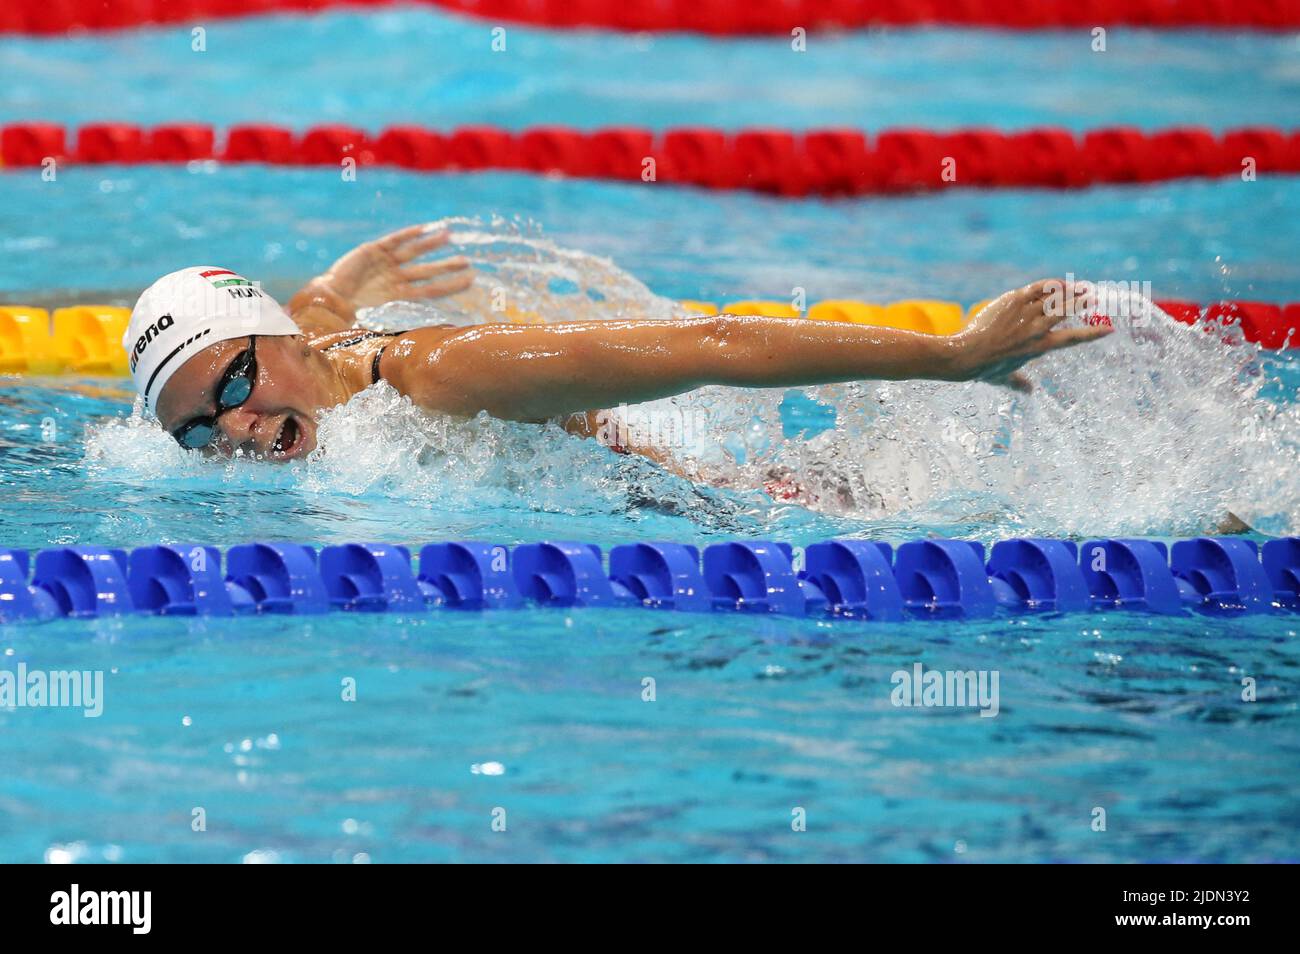 Boglarka Kapas of Hongrie 1/2 Final 200 M Butterfly Women during the 19th FINA World Championships Budapest 2022, Swimming event on June 21, 2022 in Budapest, Hungary. Photo by Laurent Lairys/ABACAPRESS.COM Stock Photo